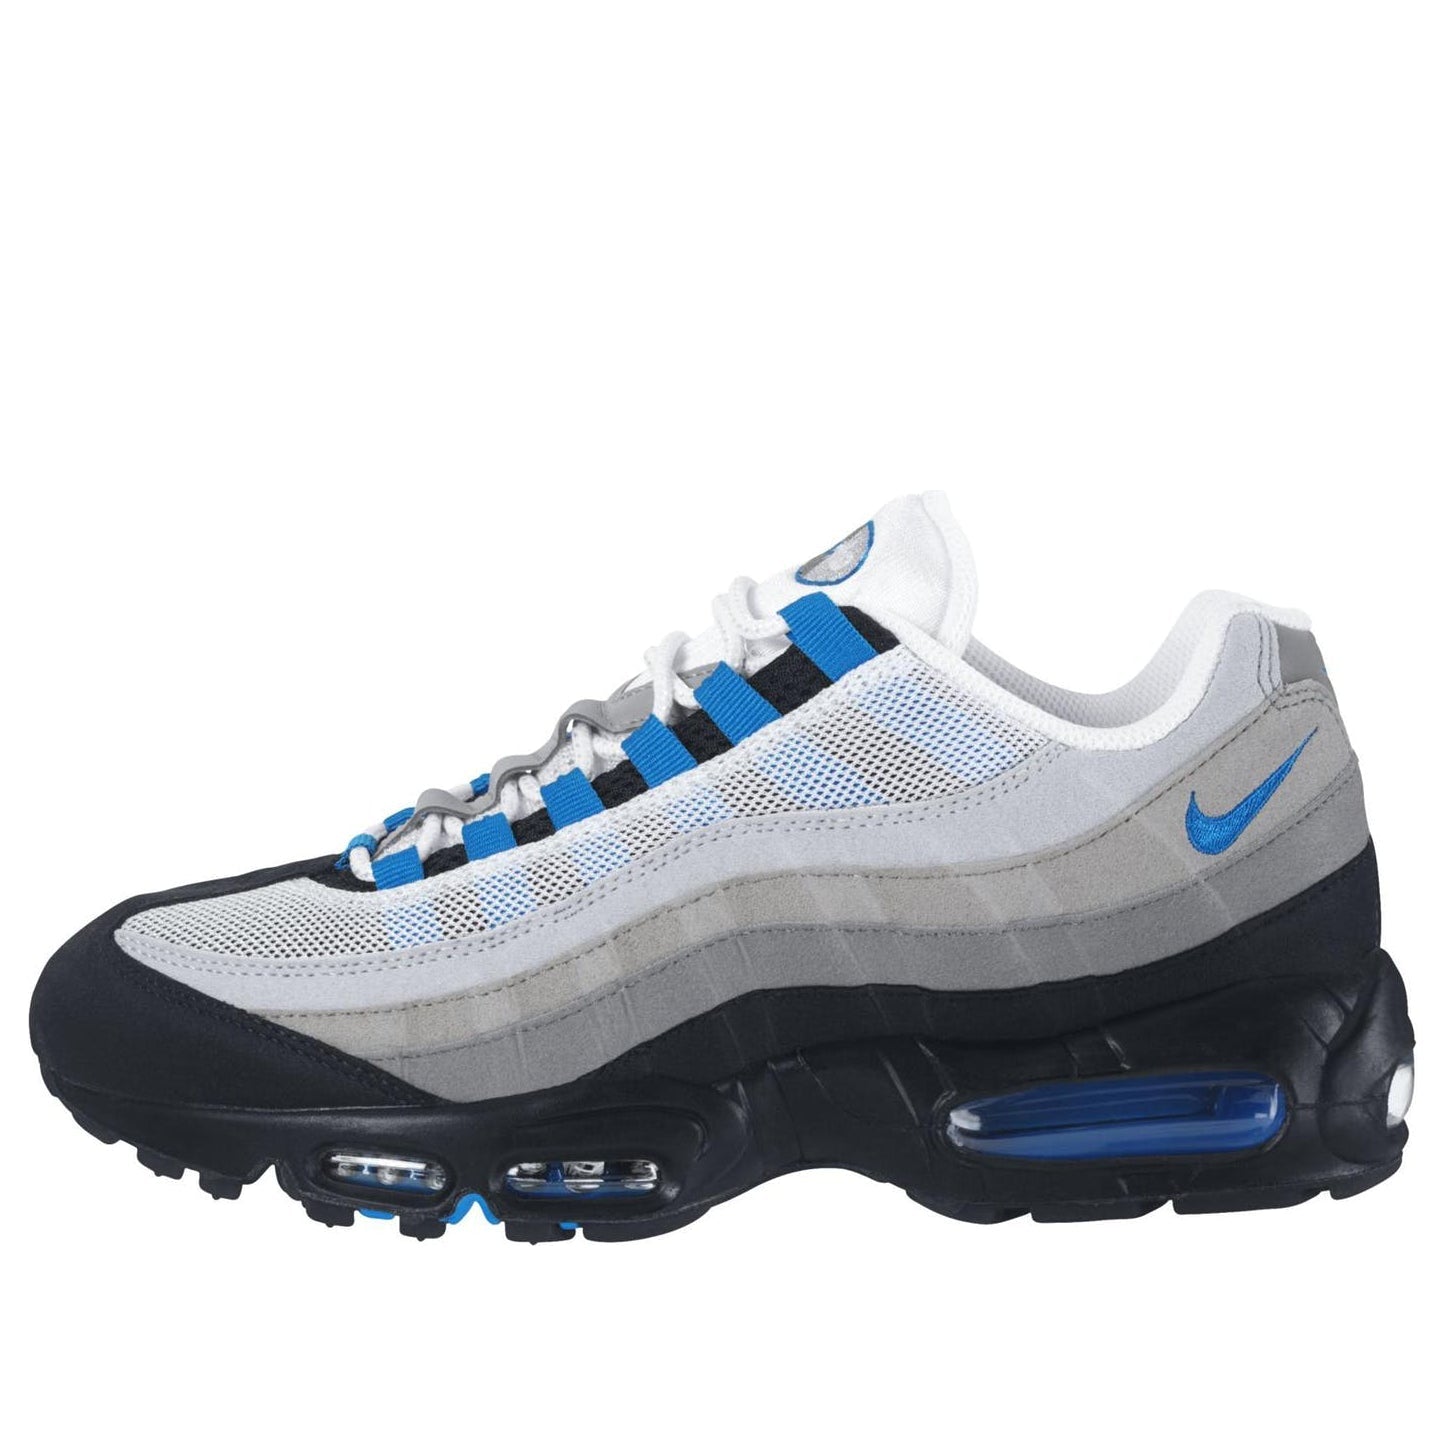 Nike Air Max 95 'Photo Blue' 2010 Ntrl Gry/Pht Bl-Mdm Gry-Cl Gry 609048-034 sneakmarks